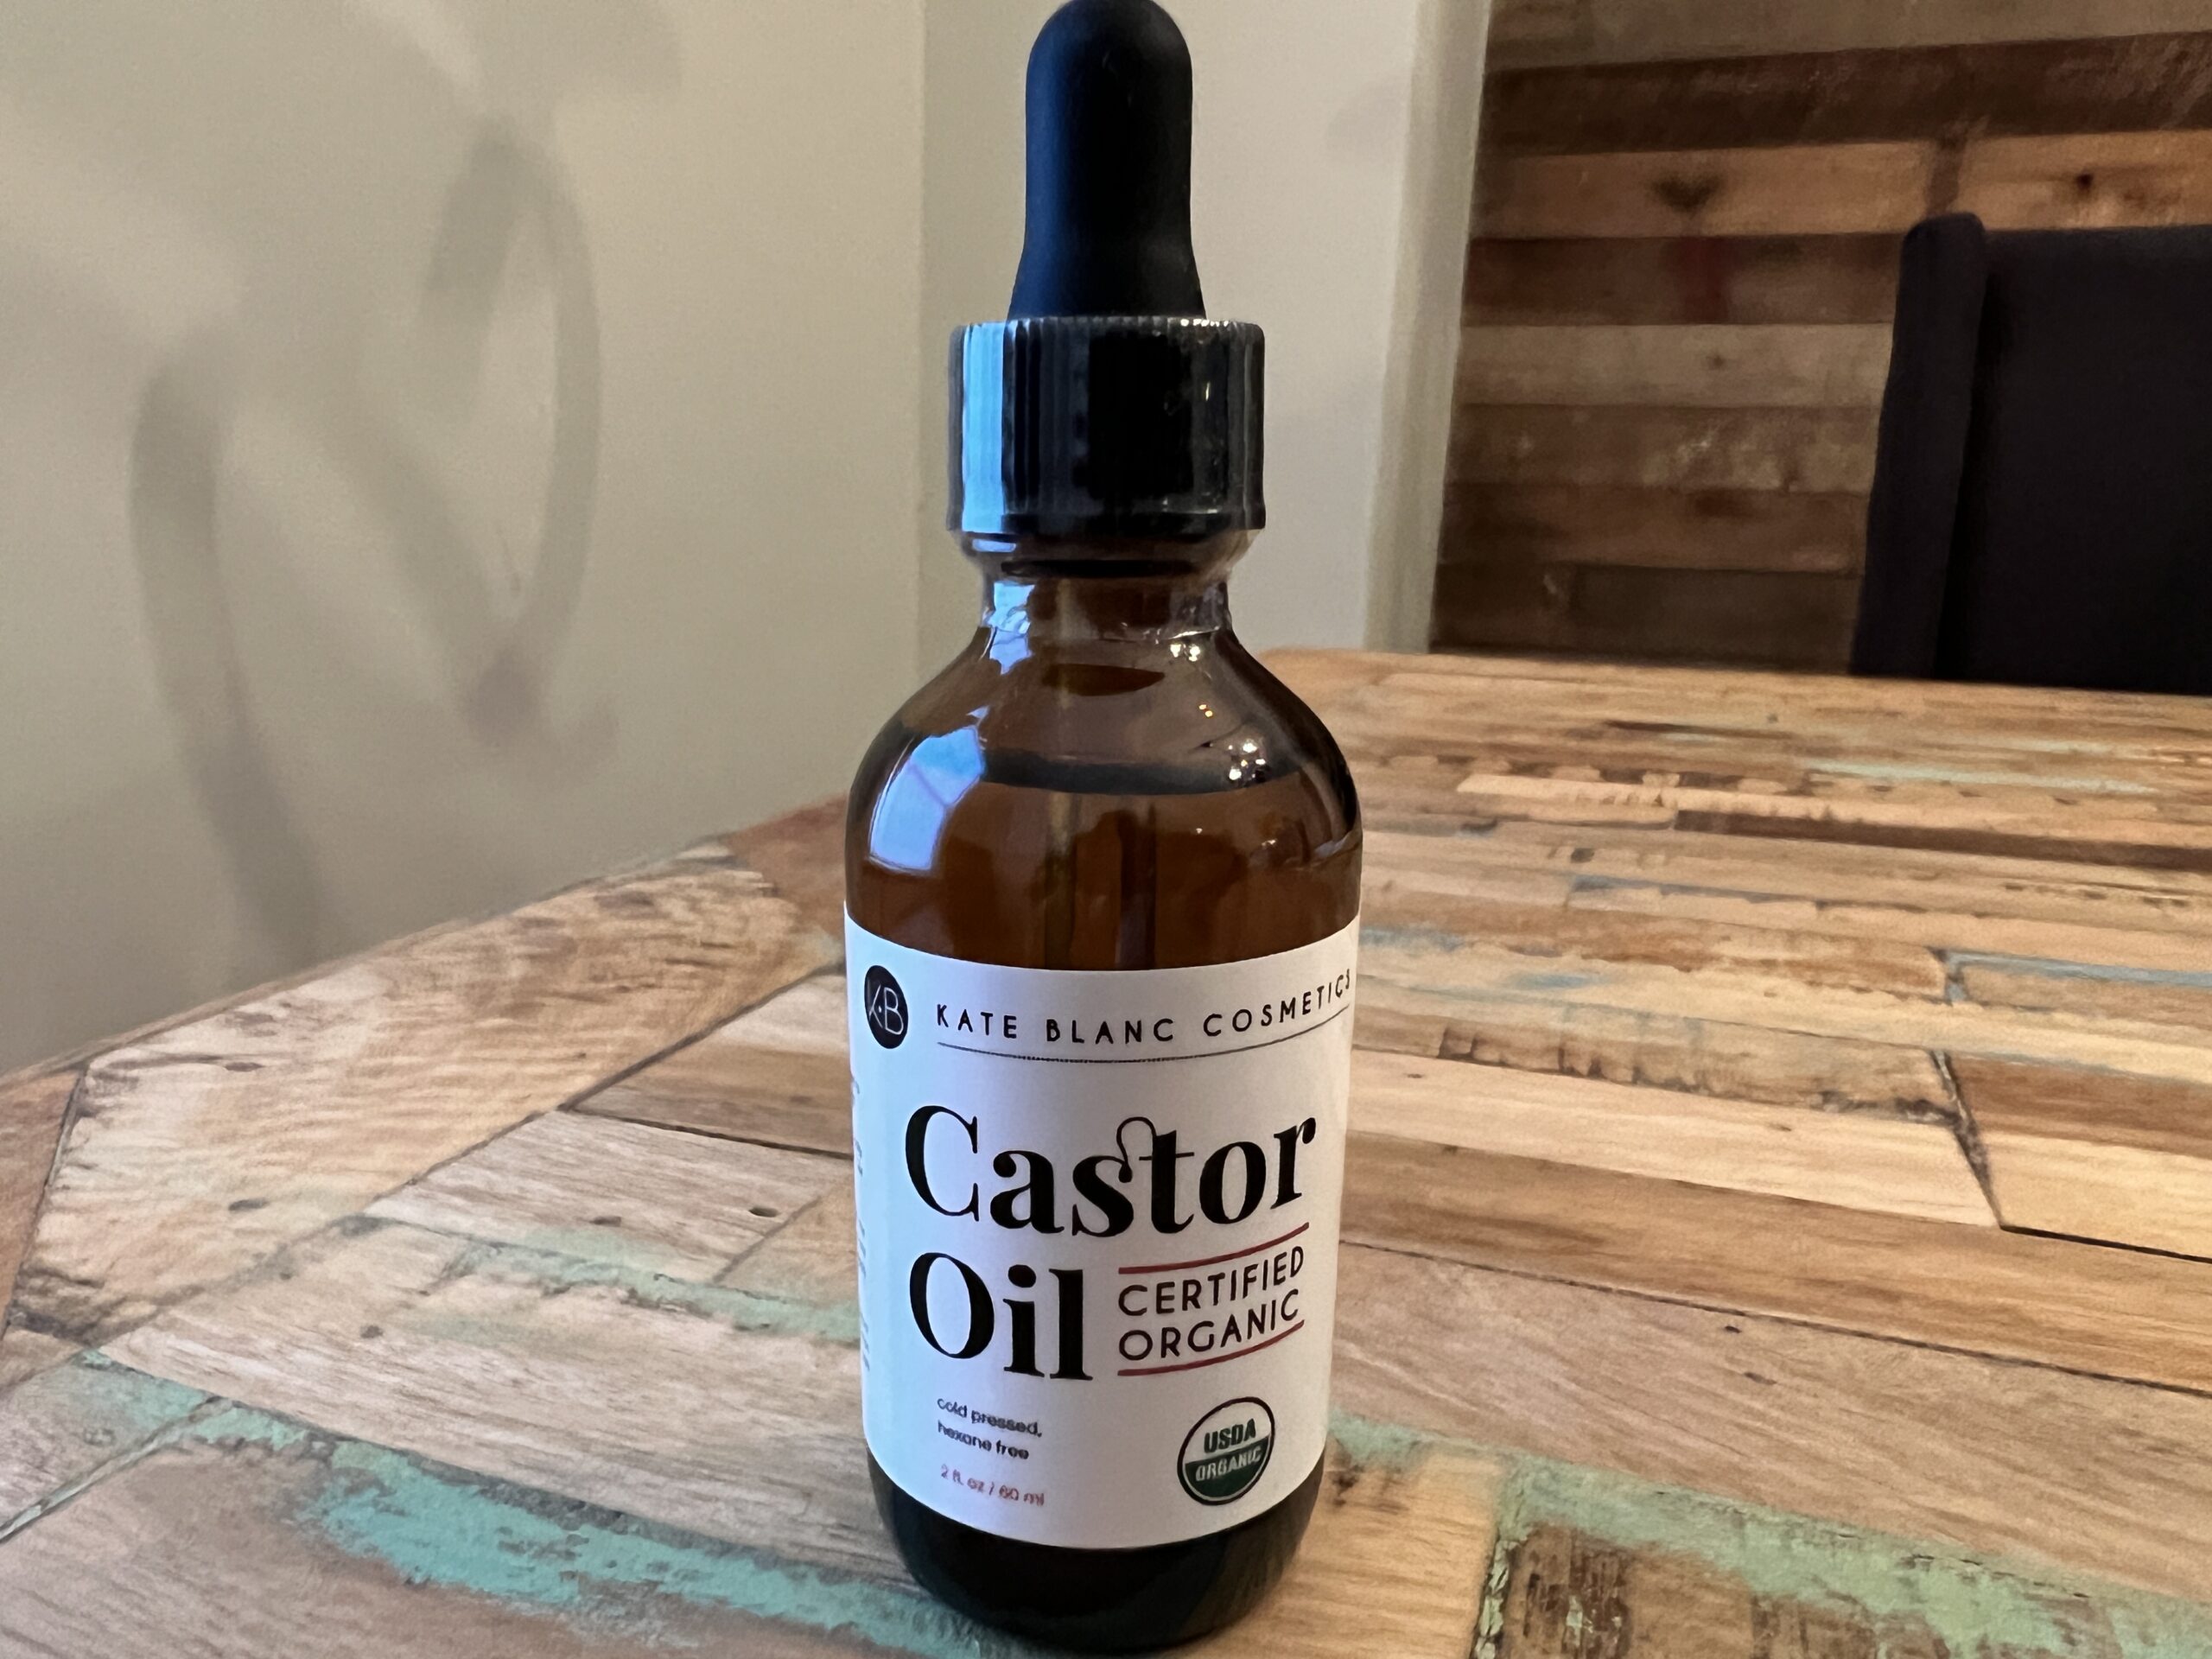 USDA organic, cold-pressed, and hexone free Castor Oil from Kate Blanc Cosmetics